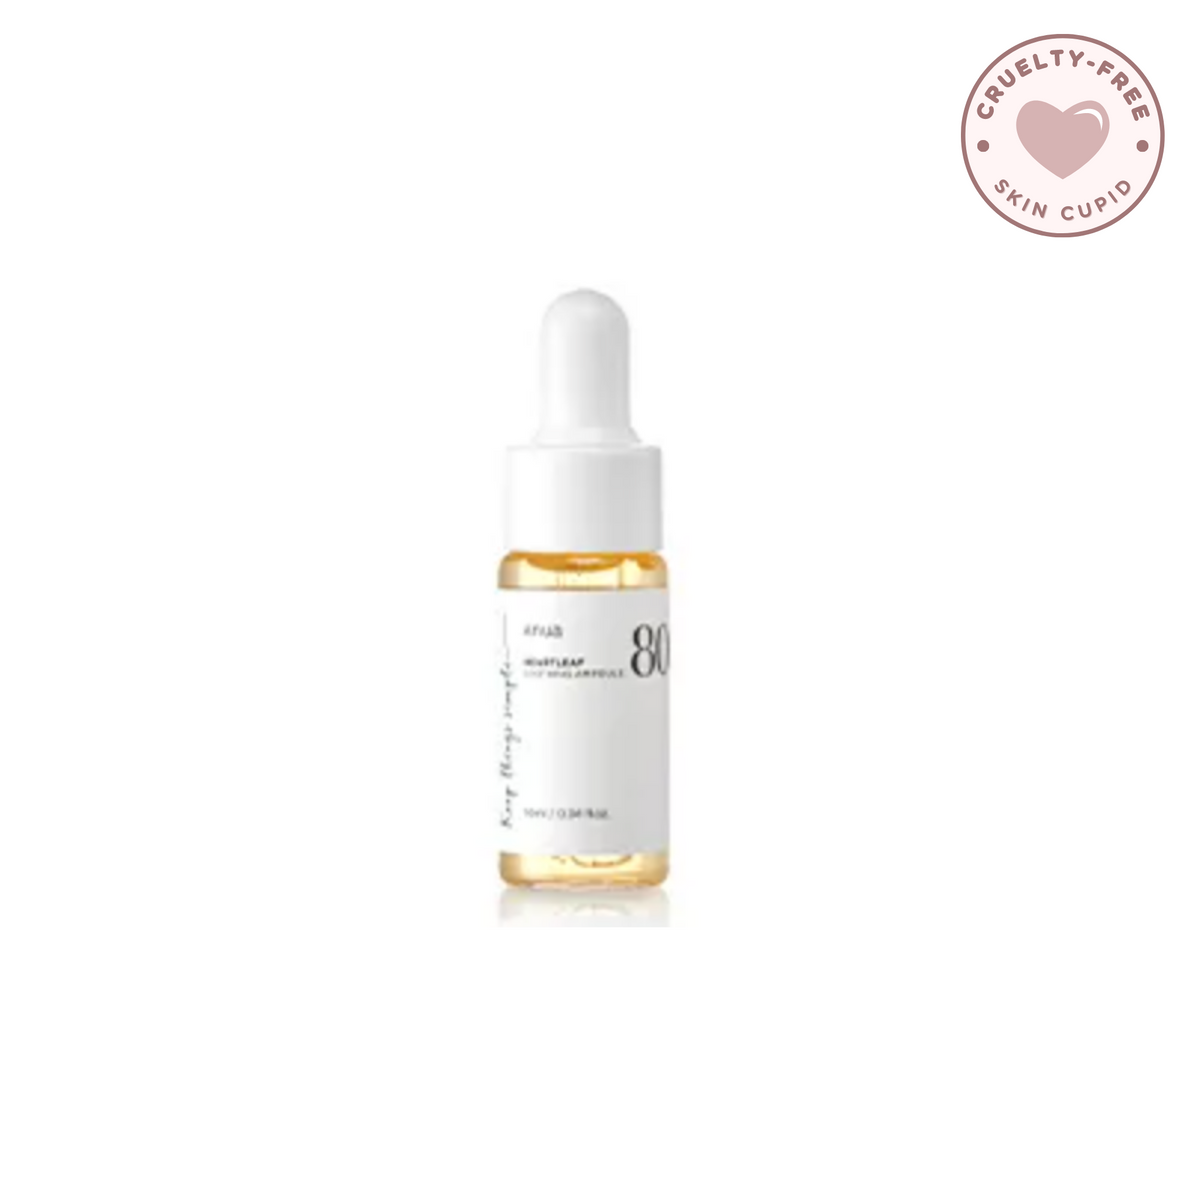 ANUA Heartleaf 80% Soothing Ampoule (10ml)